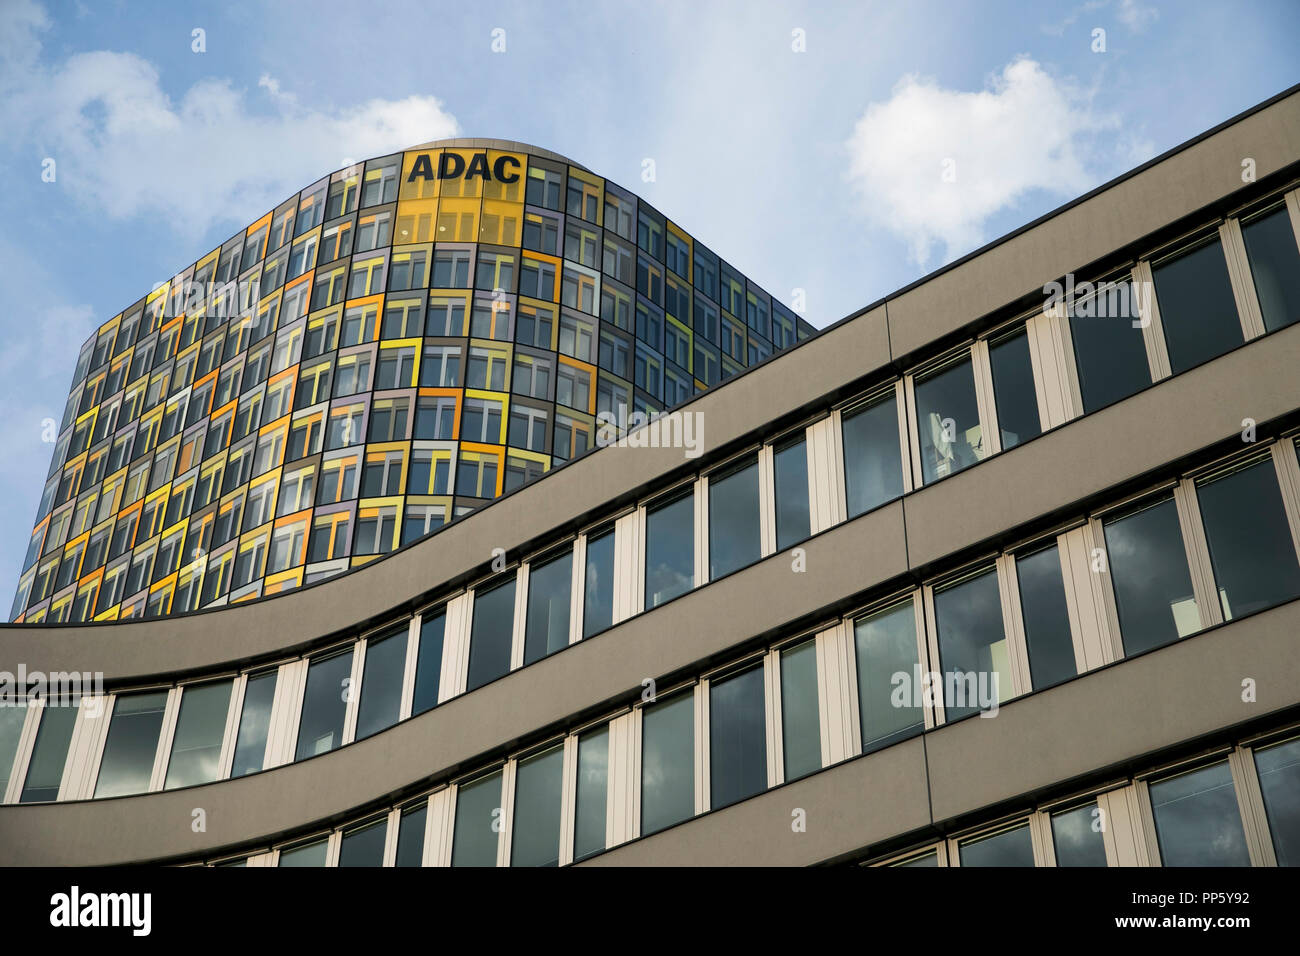 A logo sign outside of the headquarters of The ADAC (Allgemeiner Deutscher Automobil-Club) in Munich, Germany, on August 29, 2018. Stock Photo